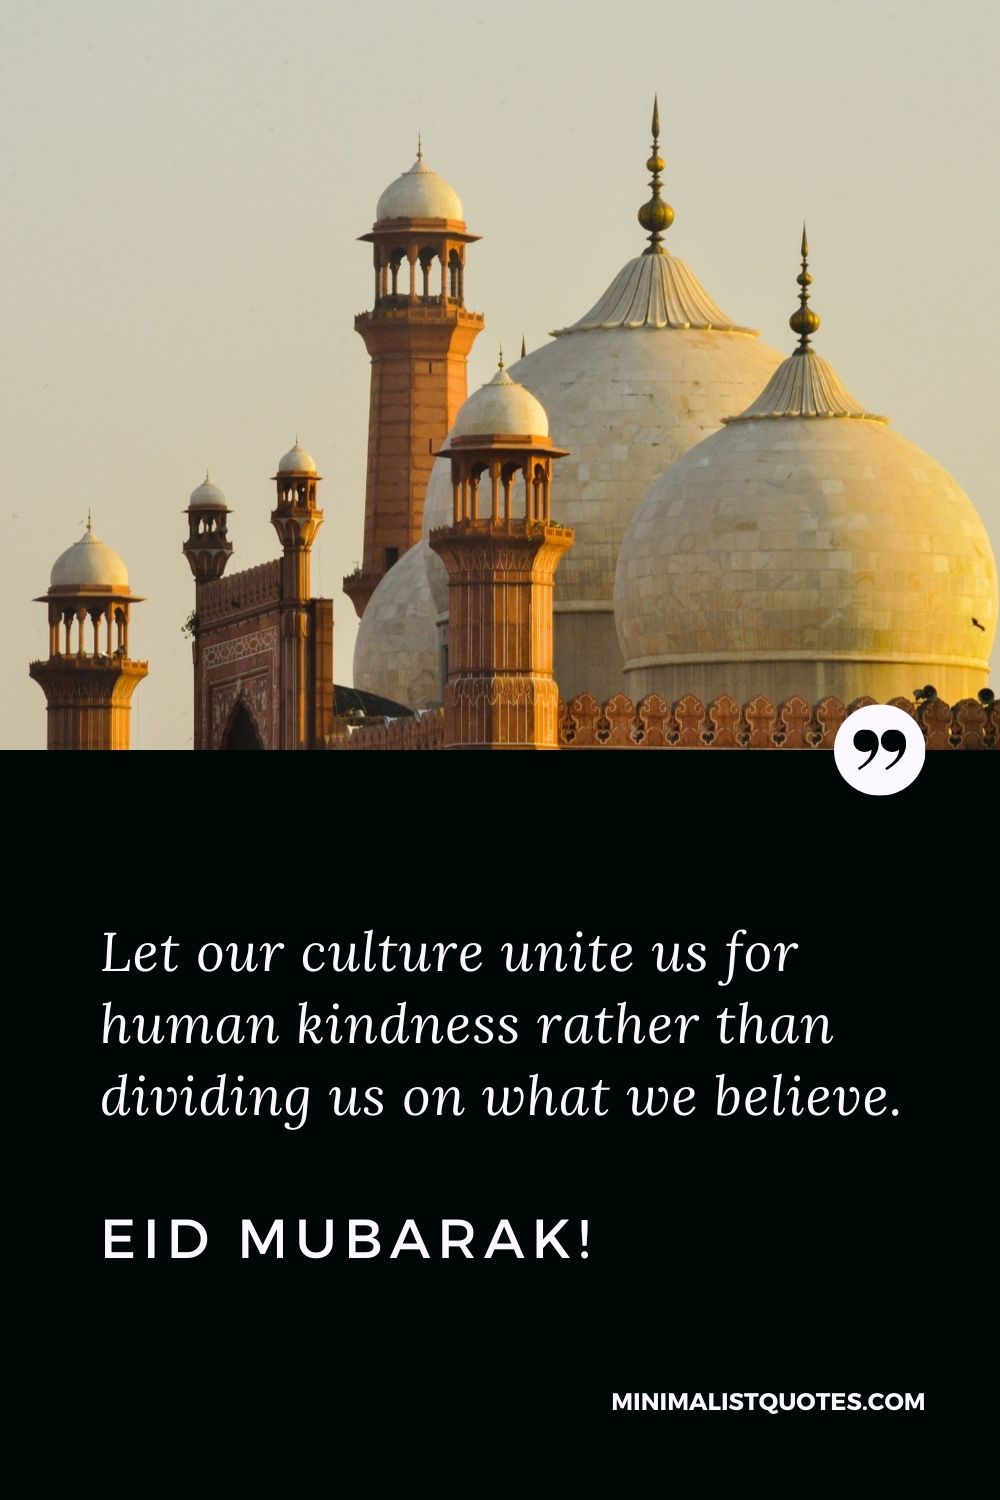 Eid al-Fitr Quote, Wish & Message With Image: Let our culture unite us for human kindness rather than dividing us on what we believe. Eid Mubarak!